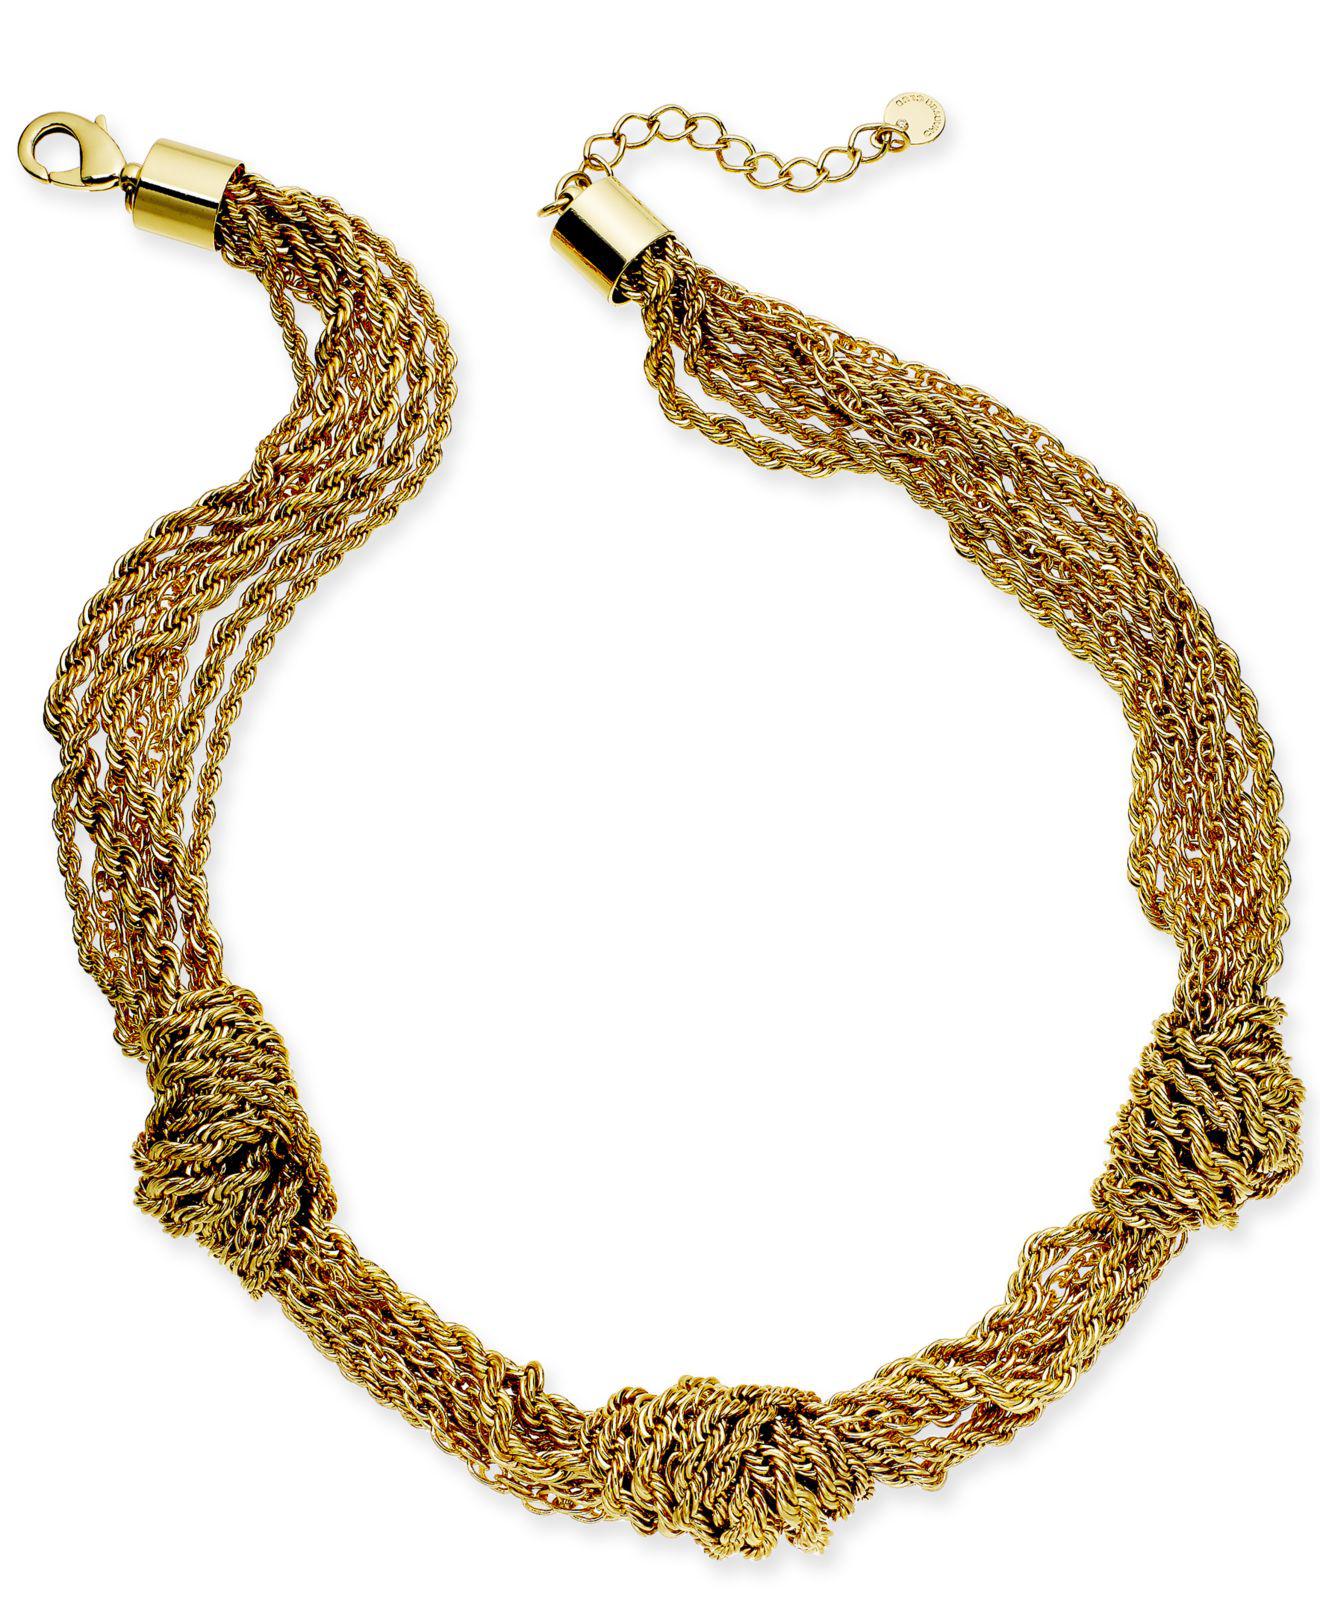 Charter Club Goldtone Multichain Knotted Collar Necklace, 17" + 2